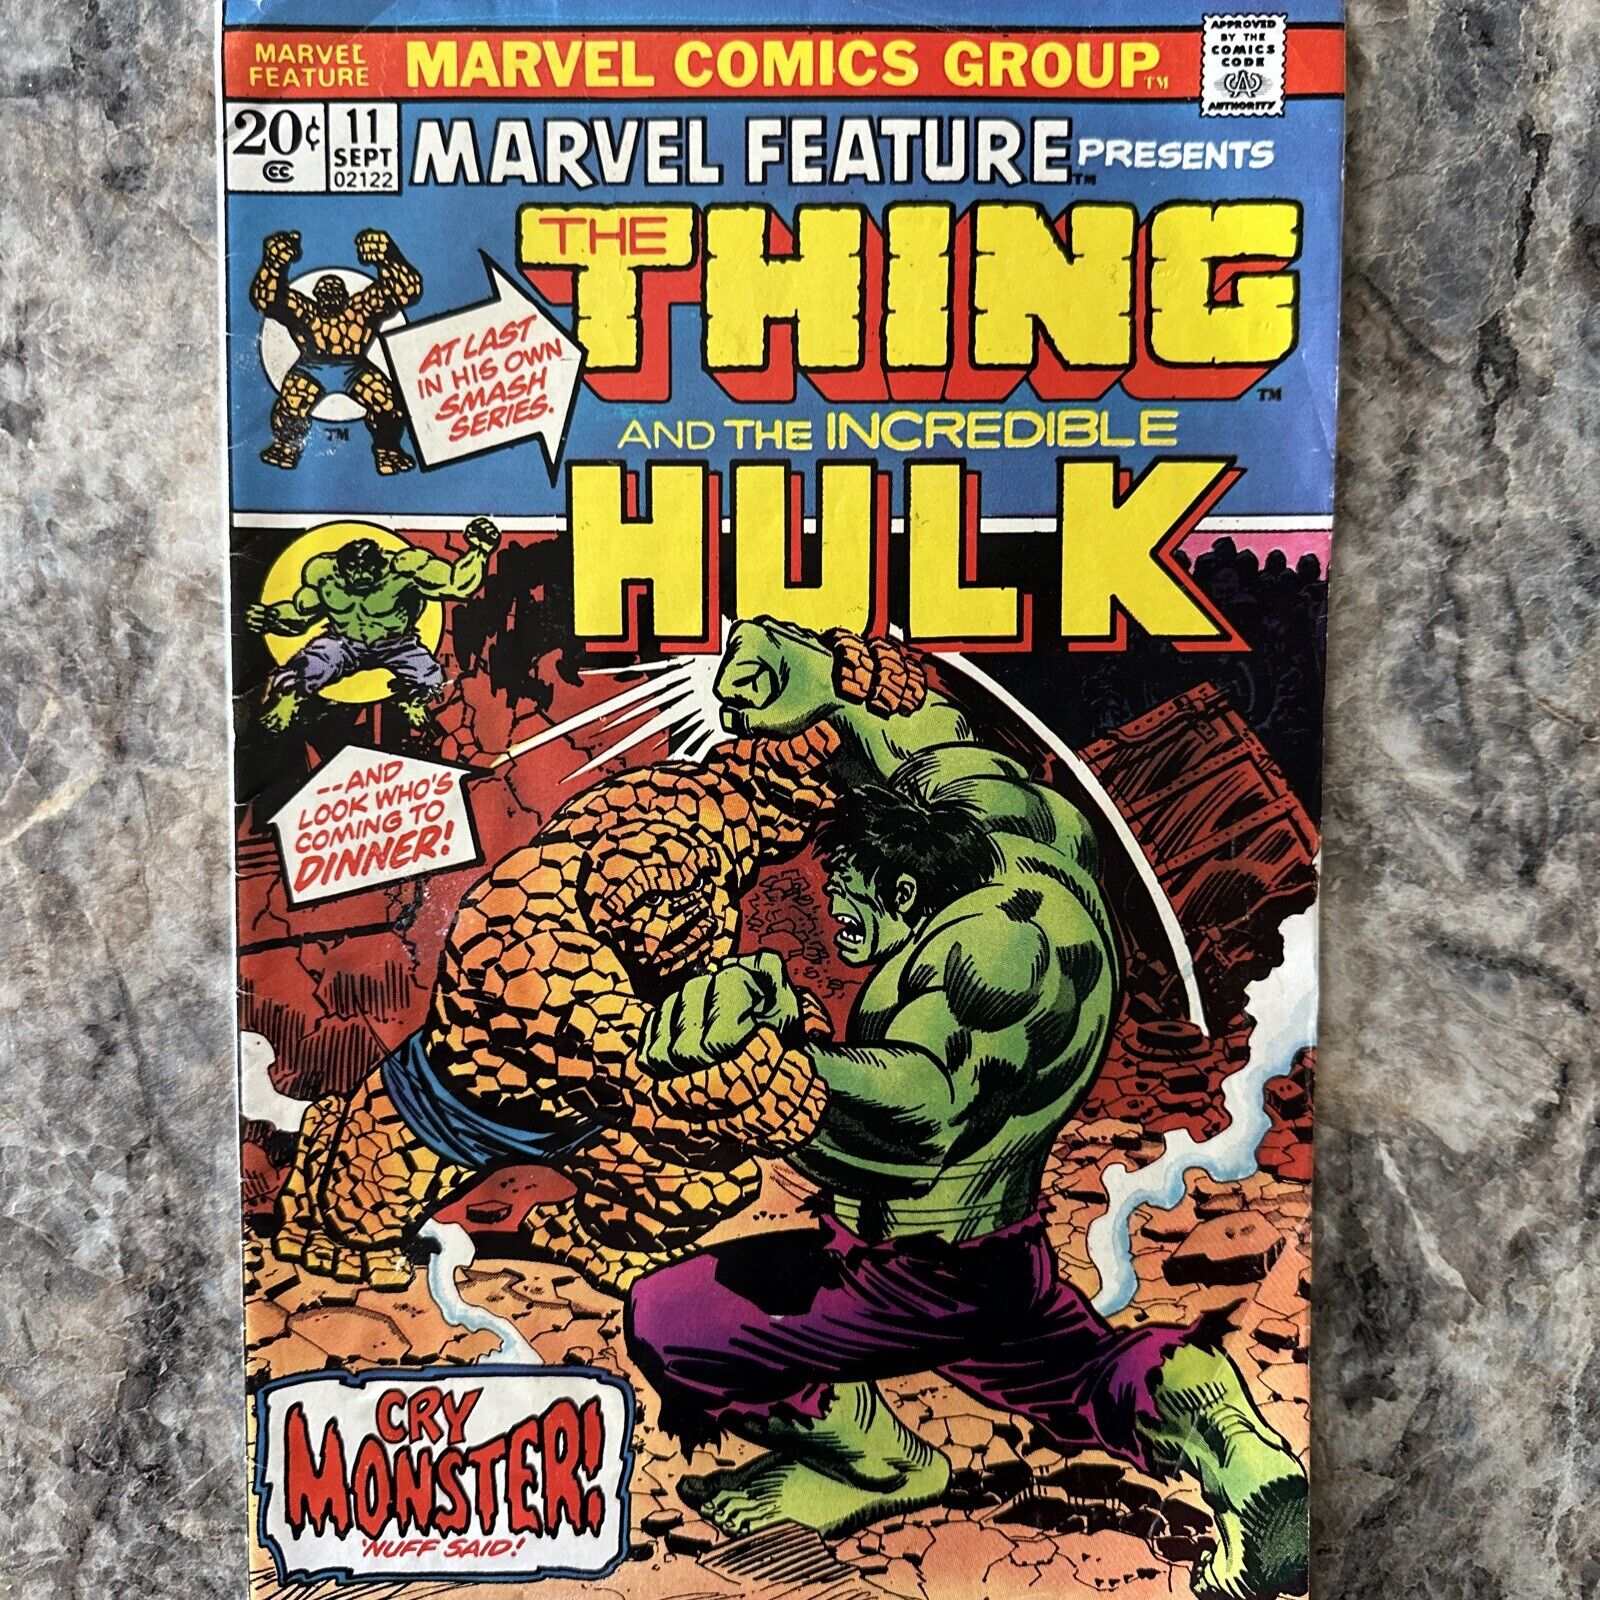 Marvel Feature Presents The Thing and The Incredible Hulk #11 (Sept 1973, Marvel